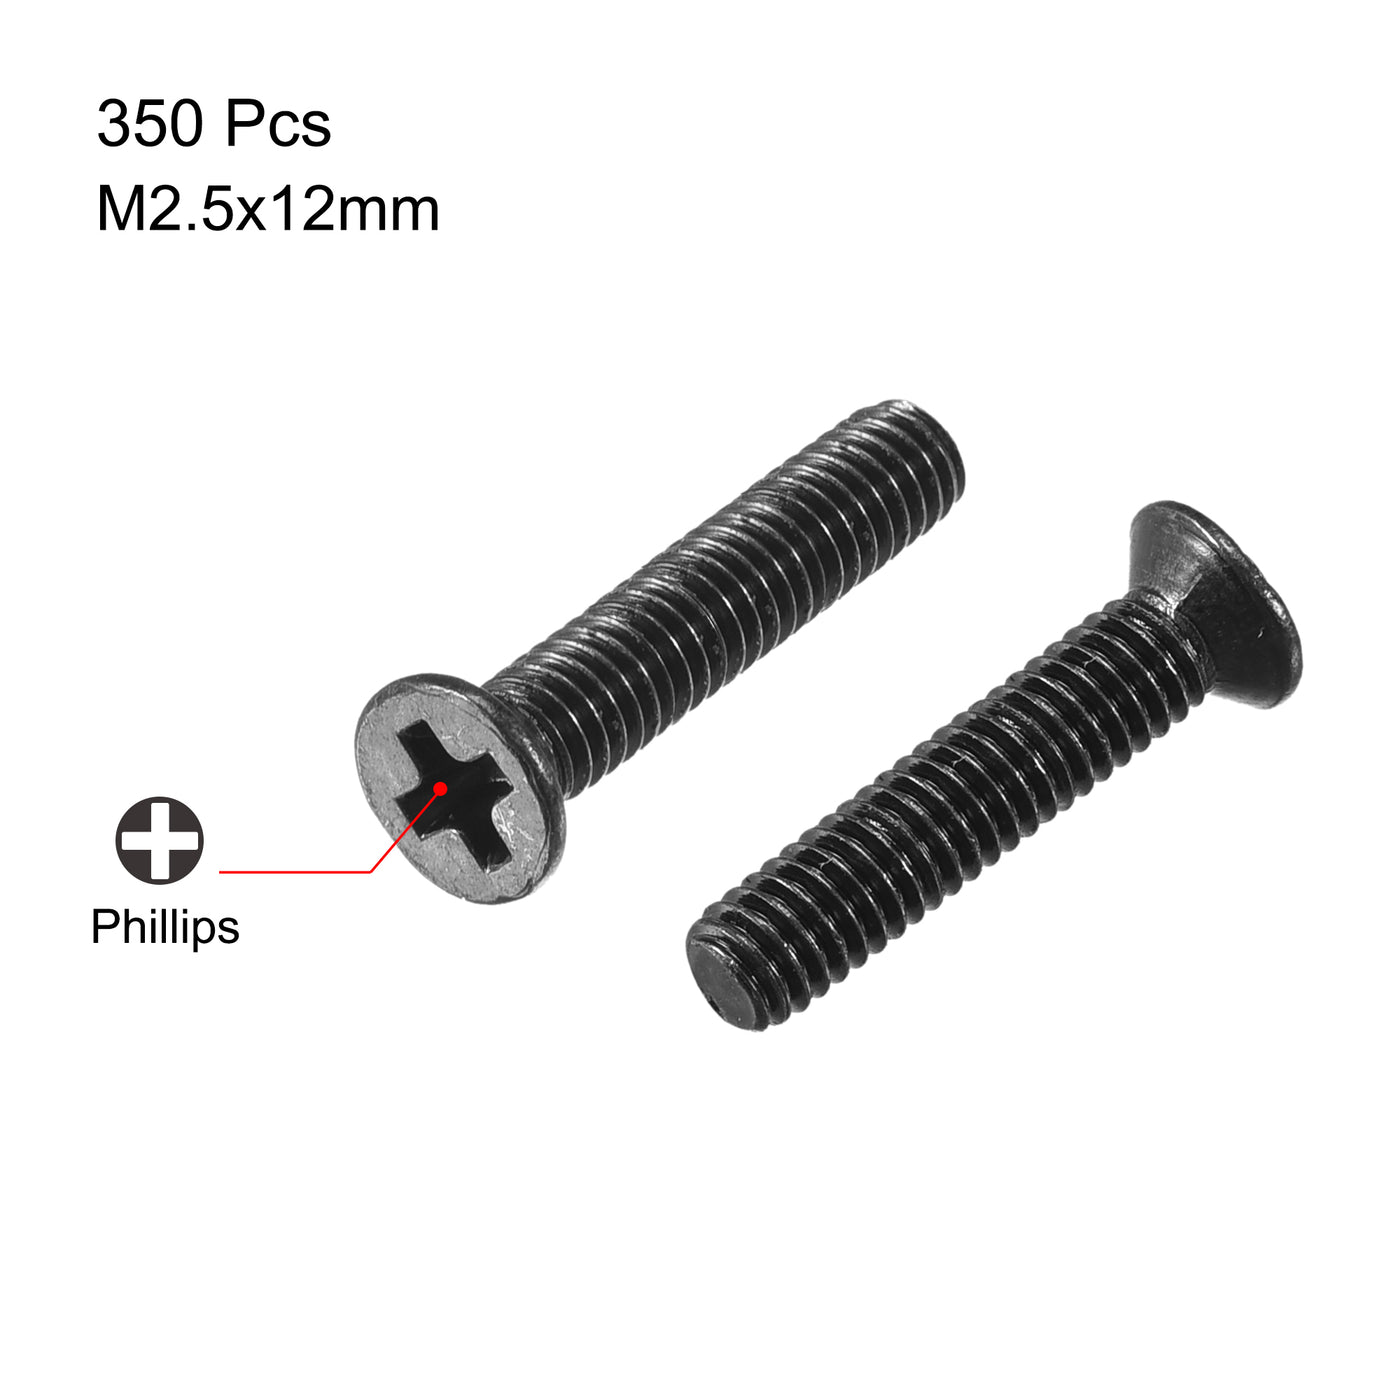 uxcell Uxcell M2.5 x 12mm Phillips Flat Head Screws Carbon Steel Machine Screws Black for Home Office Computer Case Appliance Equipment 350pcs